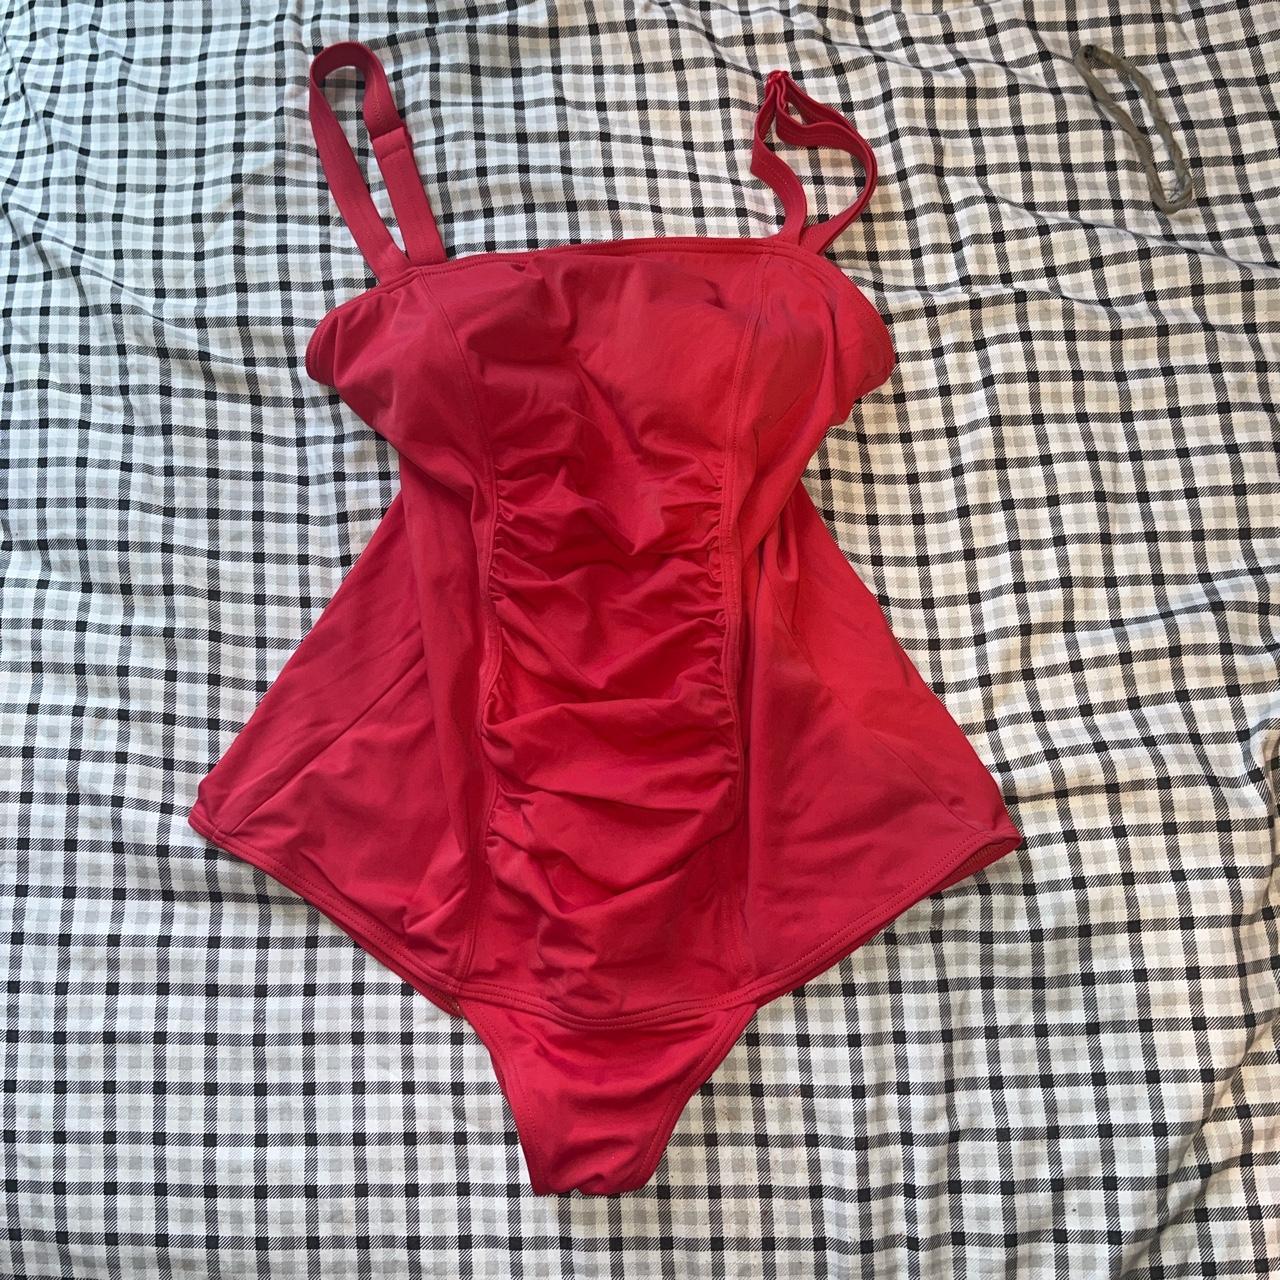 Red swimsuit \ perfect condition / ladies. - Depop